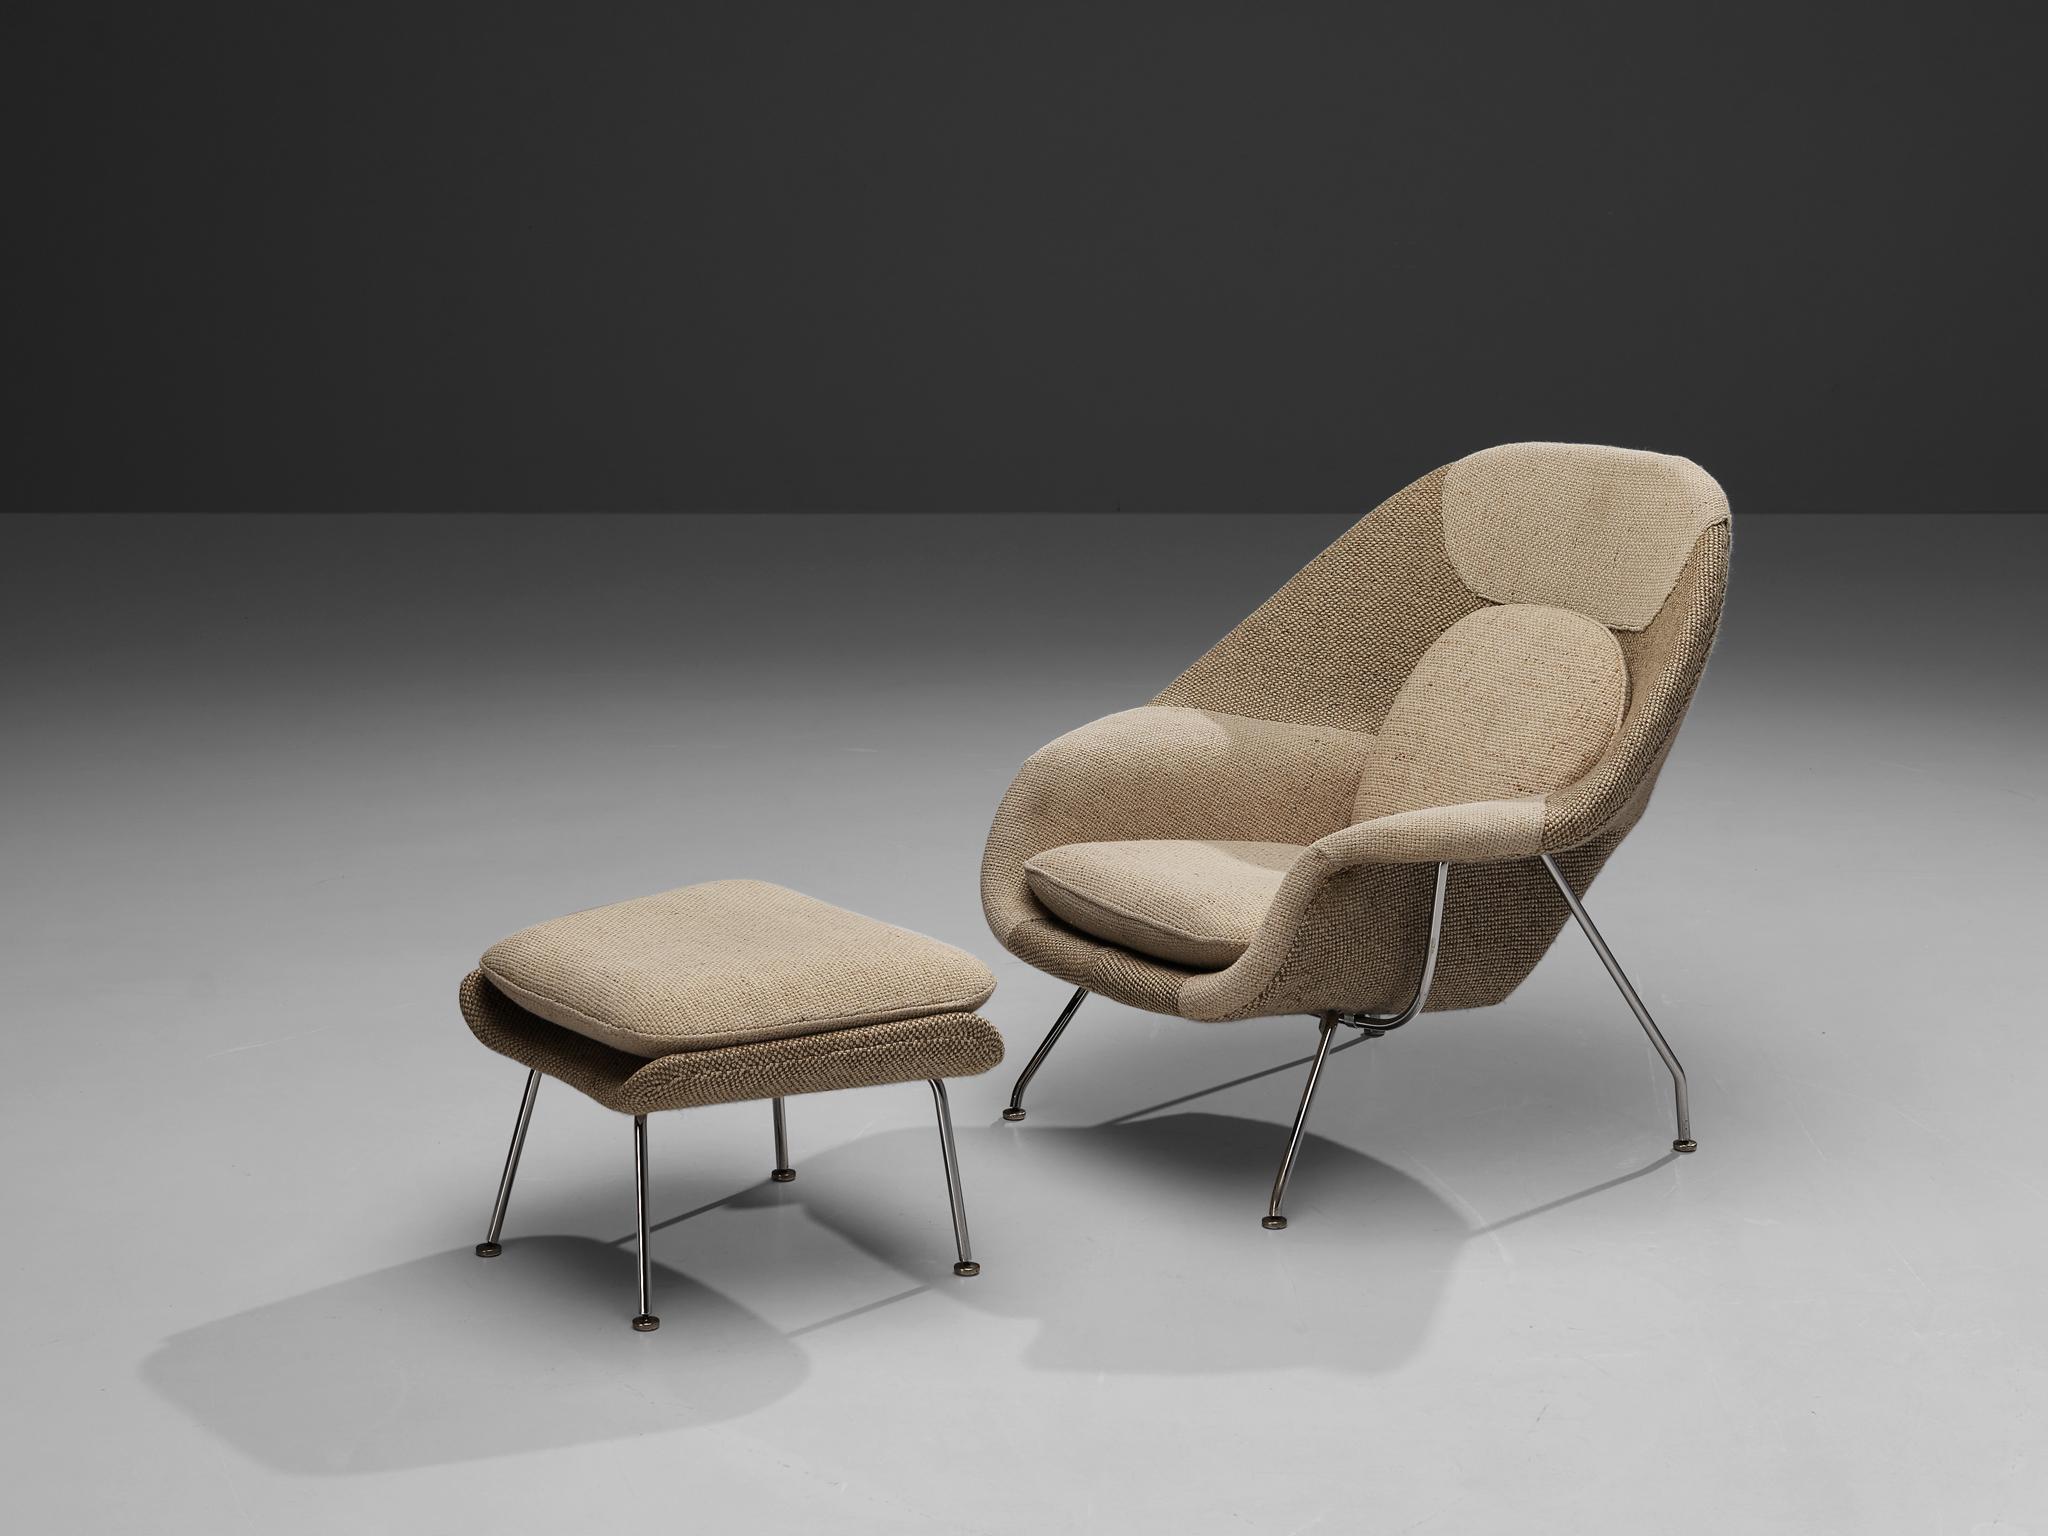 Eero Saarinen for Knoll, 'Womb' chair with ottoman, fabric, polished chrome, United States, design 1948.

This shelled, cushioned lounge chair is designed between 1946 and 1948 by Eero Saarinen. The chair was a specific request by Florence Knoll,